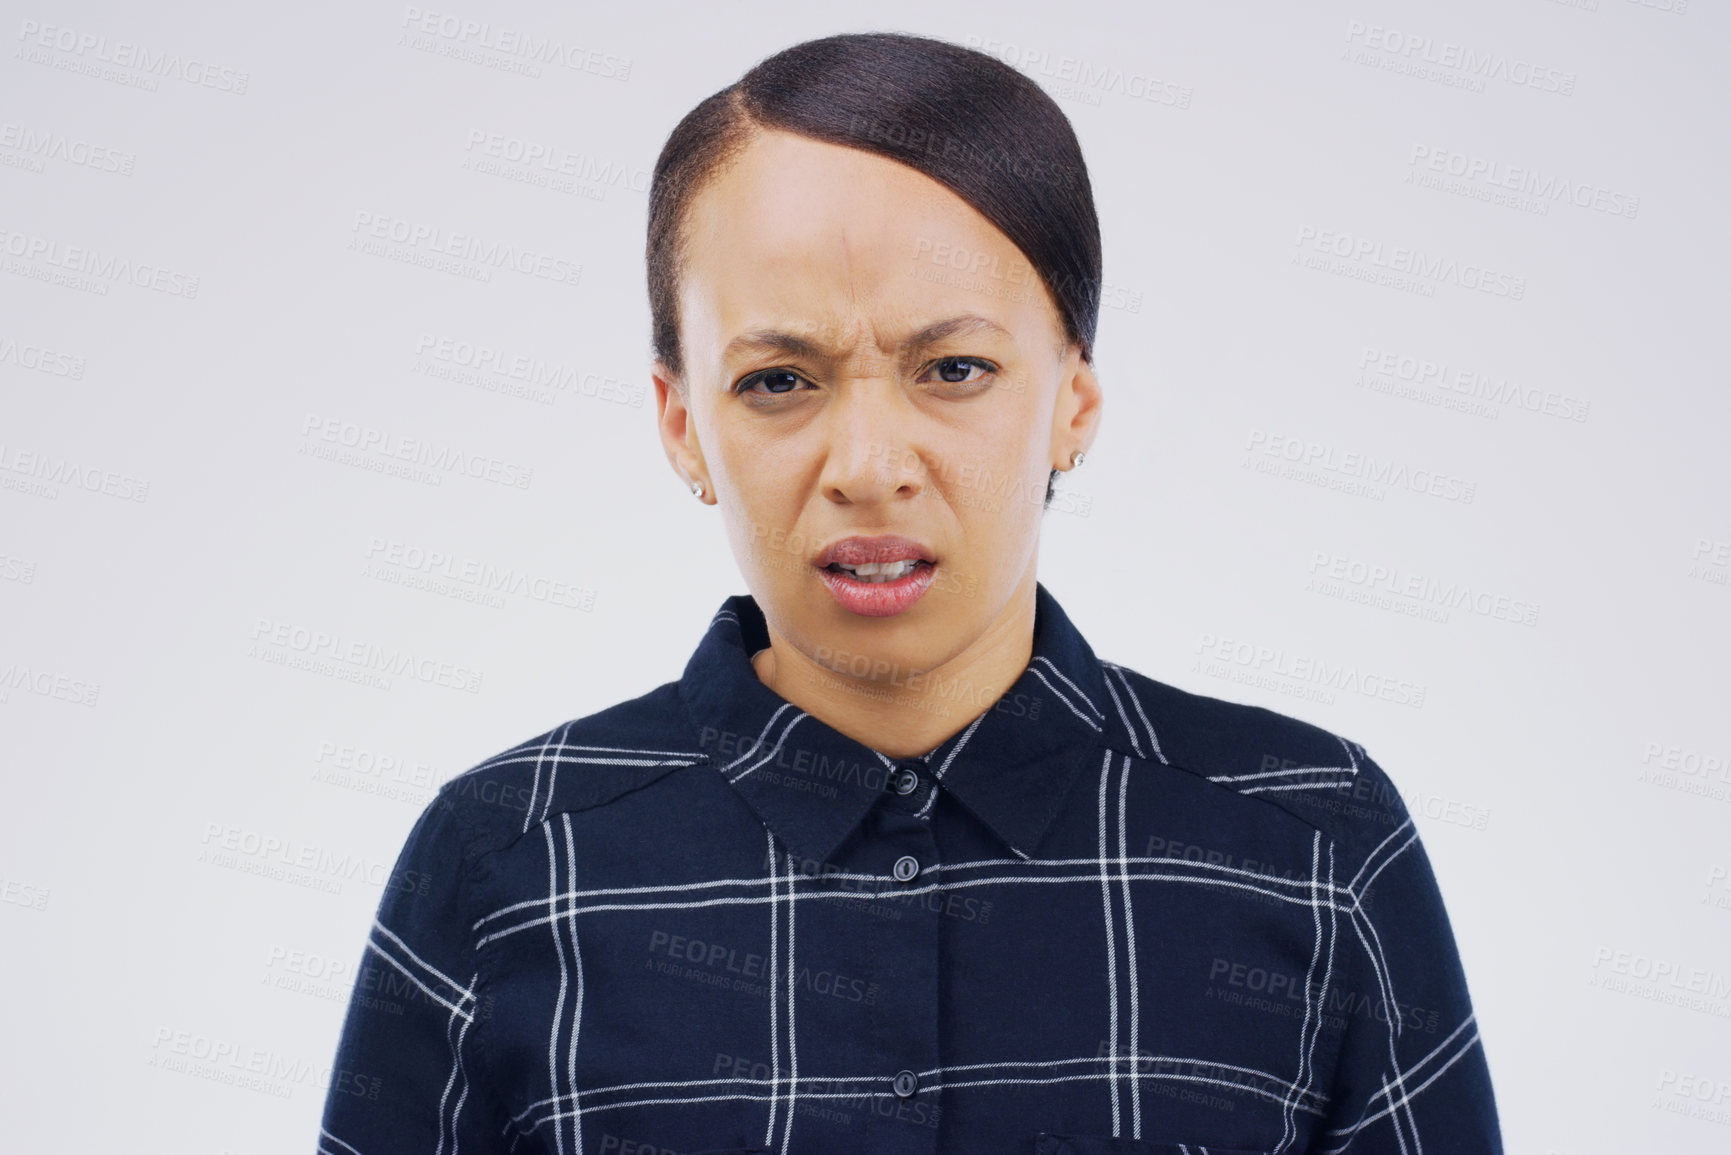 Buy stock photo Confused, doubt and portrait of a woman in studio with an unsure, uncertain or wtf facial expression. Emoji, question and young female person with serious face or emotion isolated by gray background.